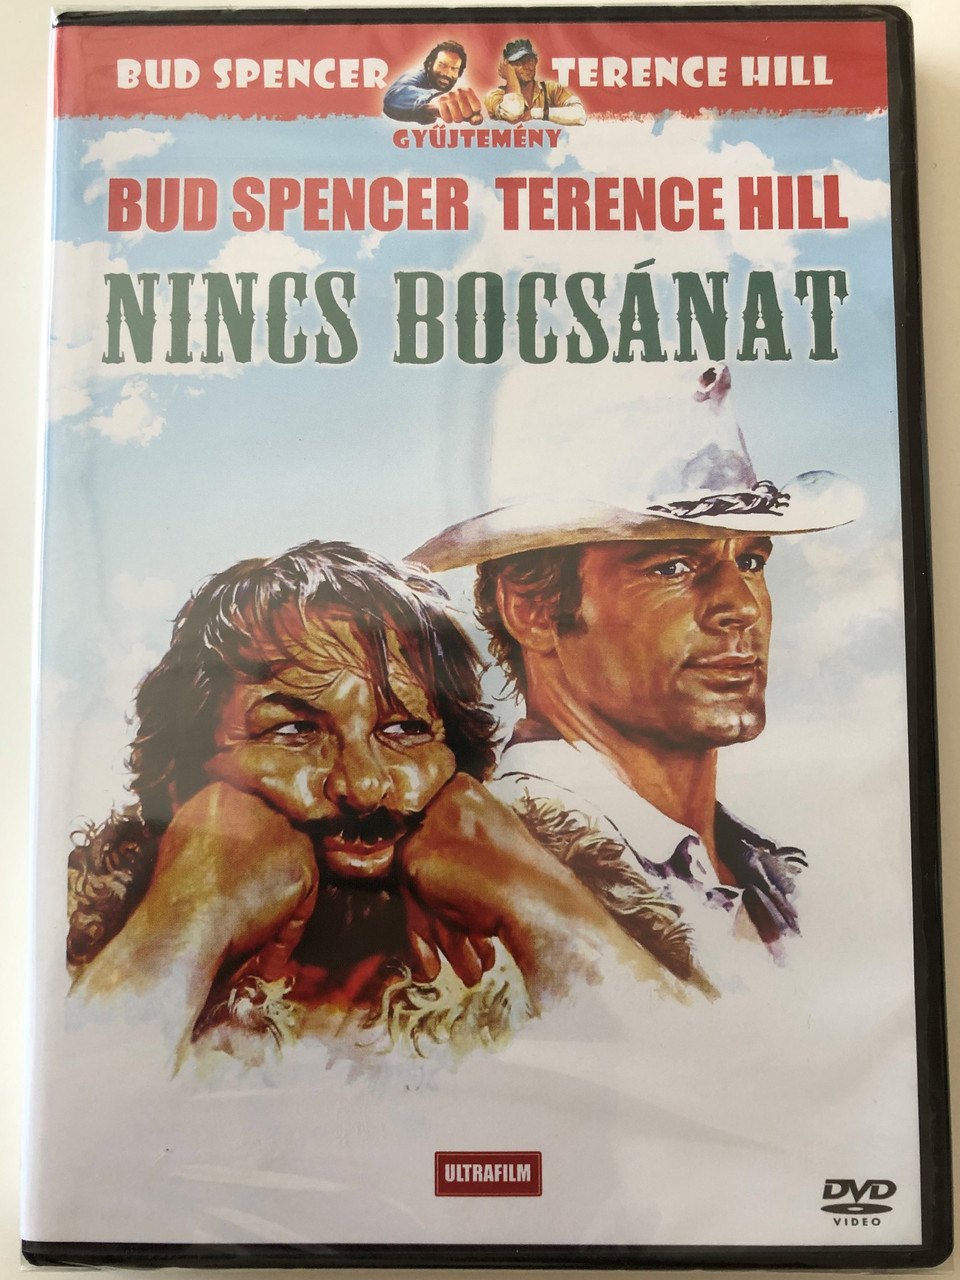 Dio perdona... io no! DVD 1967 Nincs bocsánat (God Forgives... I Don't) /  Directed by Giuseppe Colizzi/ Starring: Terence Hill, Frank Wolff, Bud  Spencer, Gina Rovere, Jose Manuel Martin - bibleinmylanguage